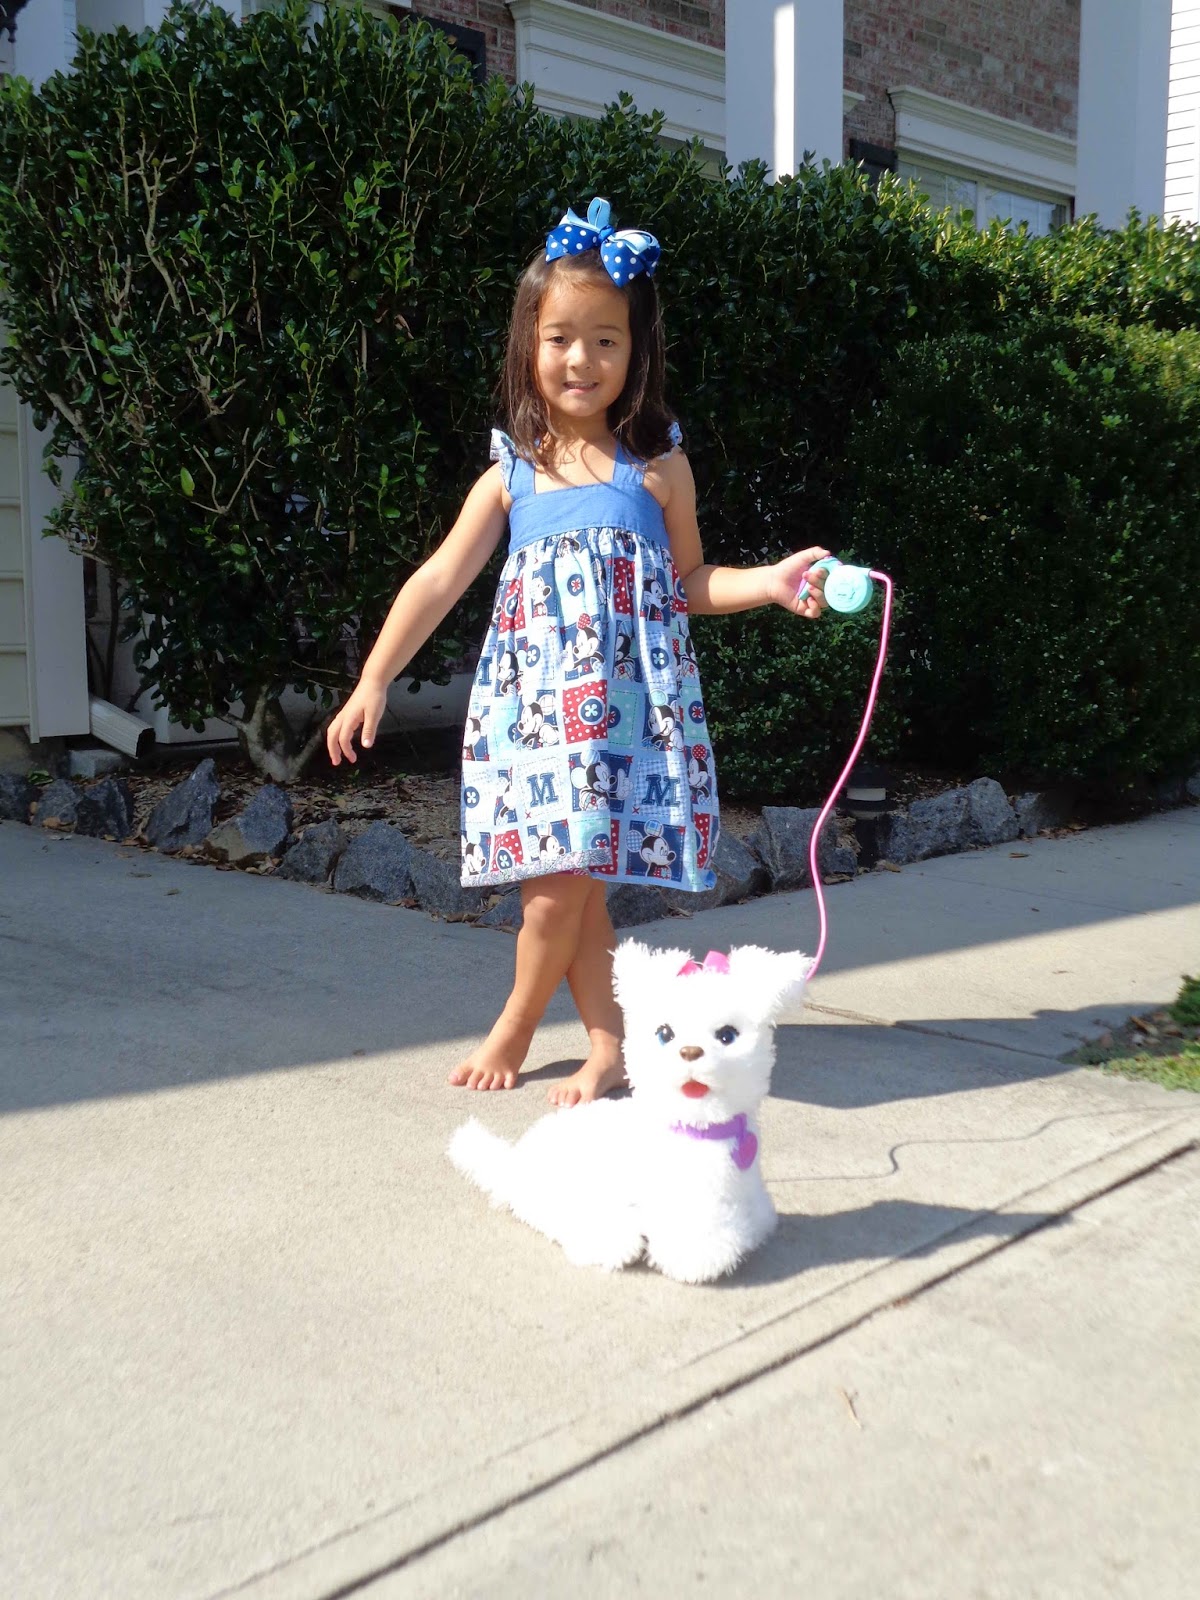 My Honest Review of the FurReal Friends GoGo My Walkin' Pet Pup